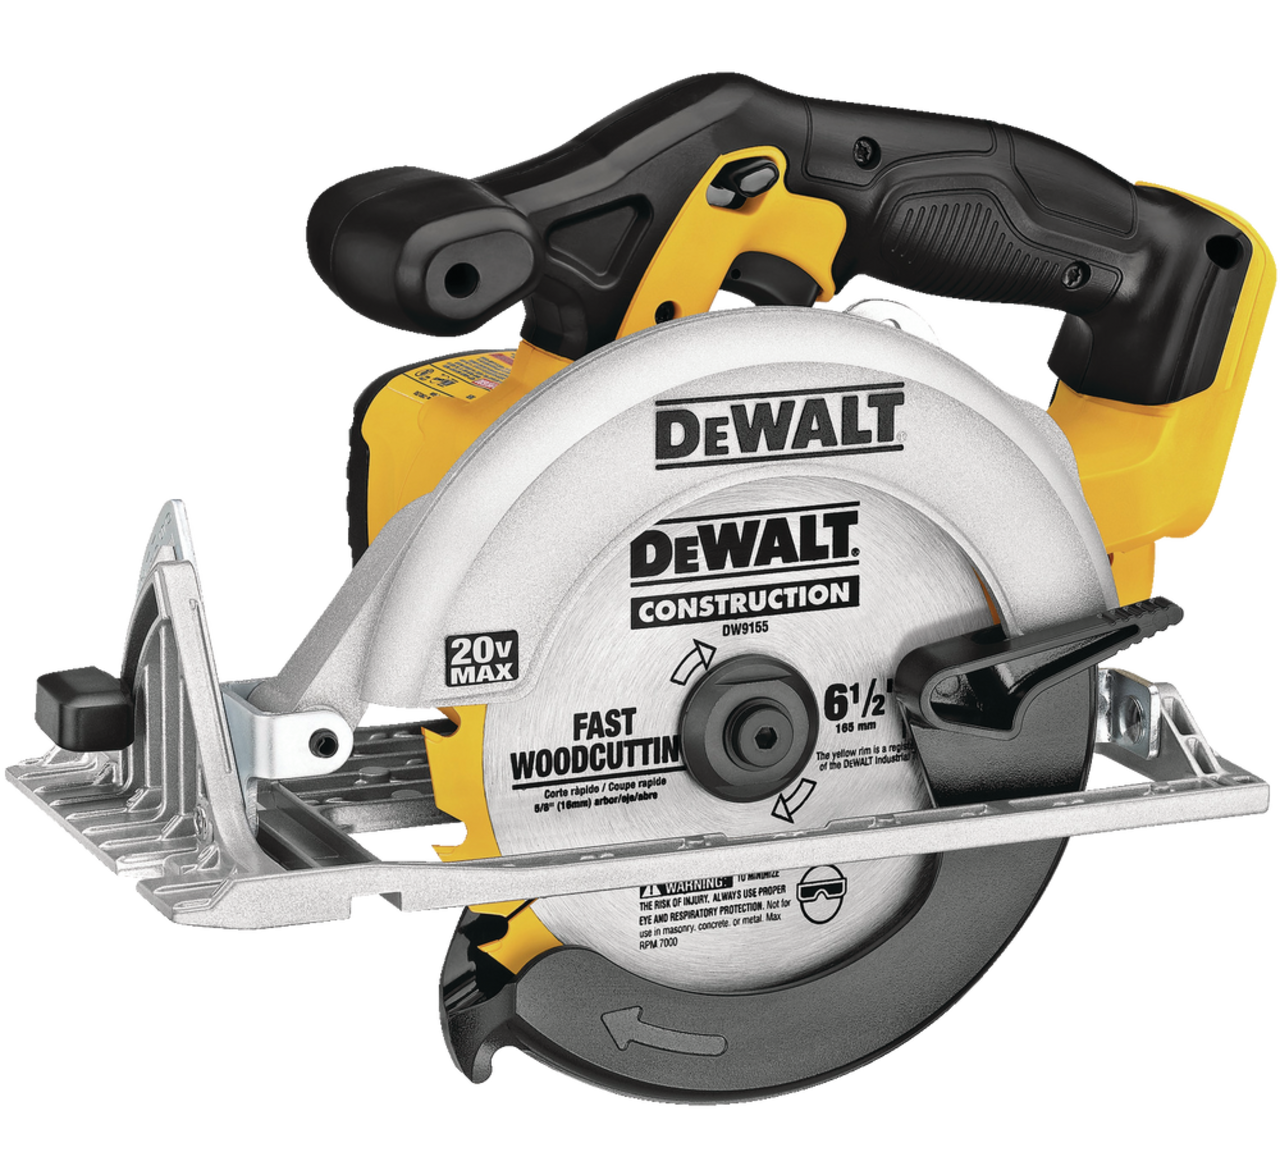 https://media-www.canadiantire.ca/product/fixing/tools/portable-power-tools/0541376/dewalt-20v-max-6-1-2-circular-saw-bare-tool-237adb02-f51d-4a4c-aa38-7f01c9267c6f.png?imdensity=1&imwidth=640&impolicy=mZoom